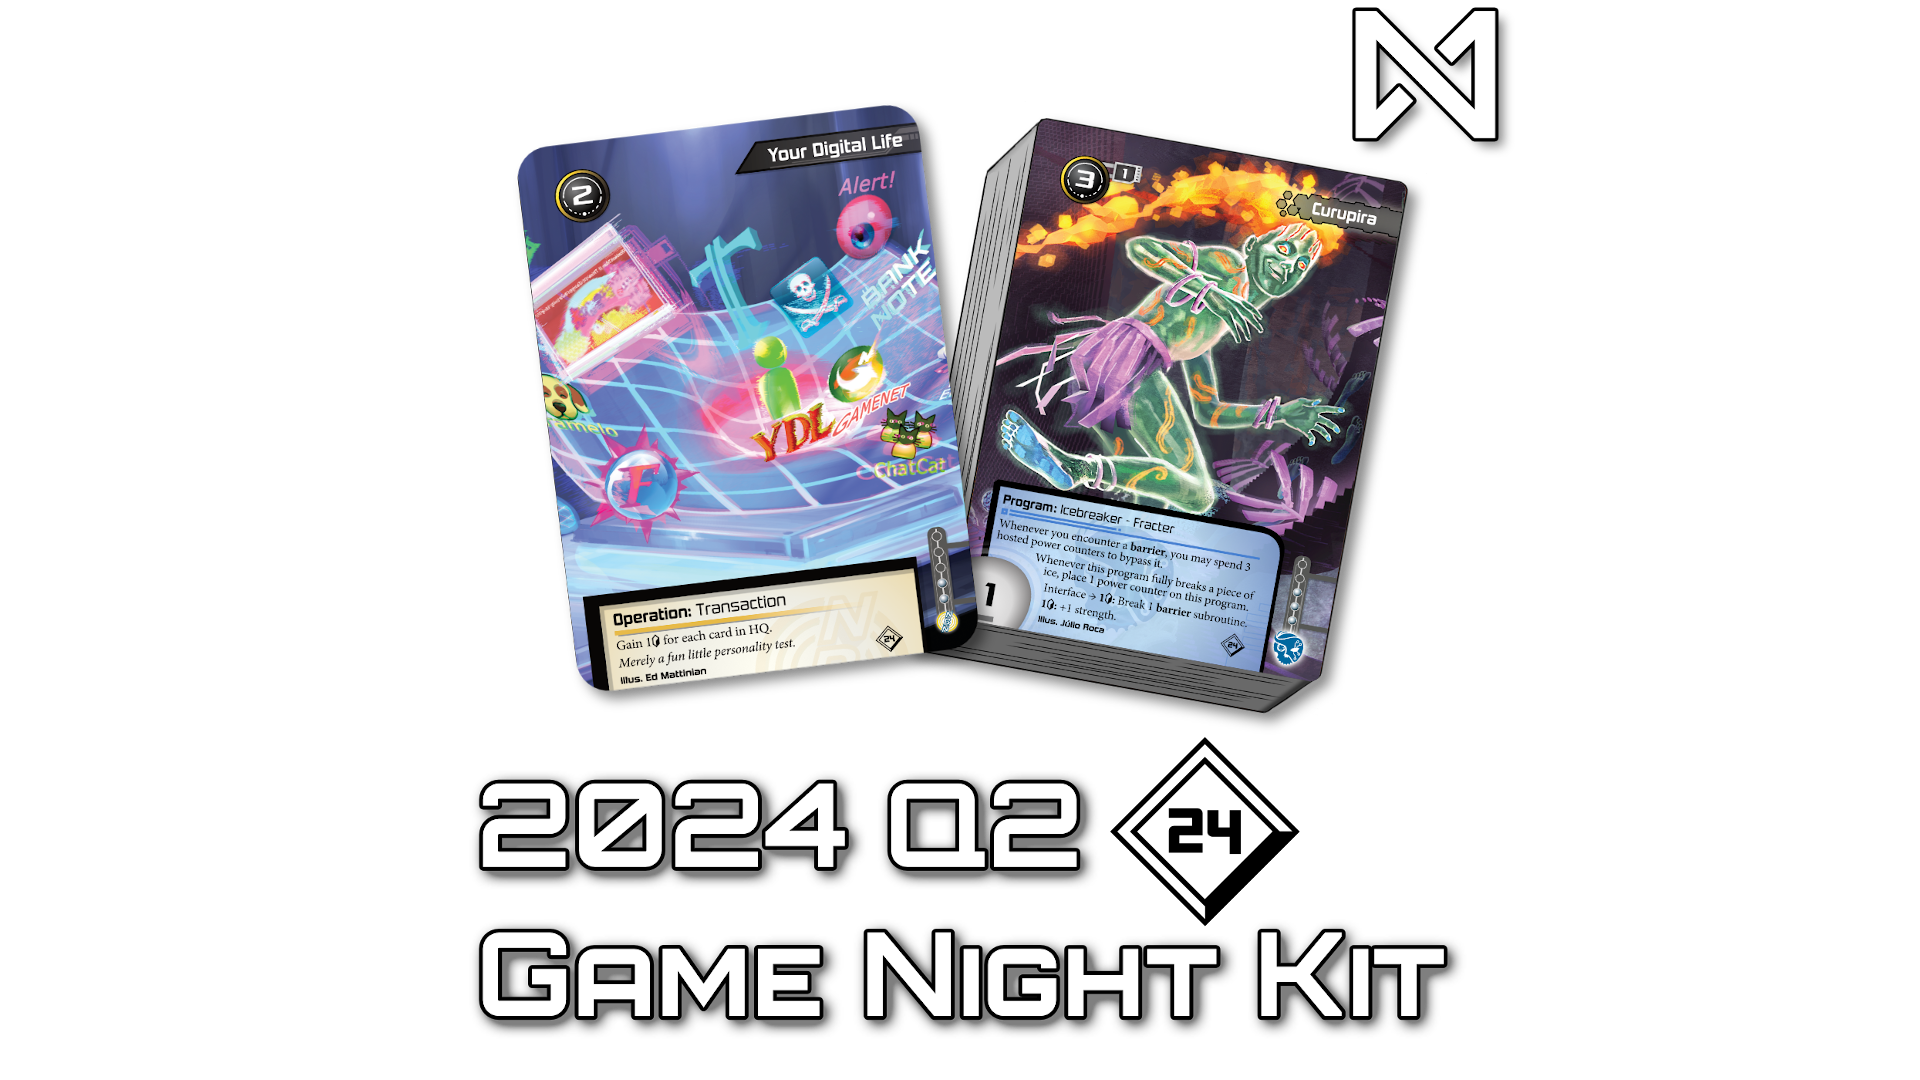 2024 Q2 Game Night Kits are now available!